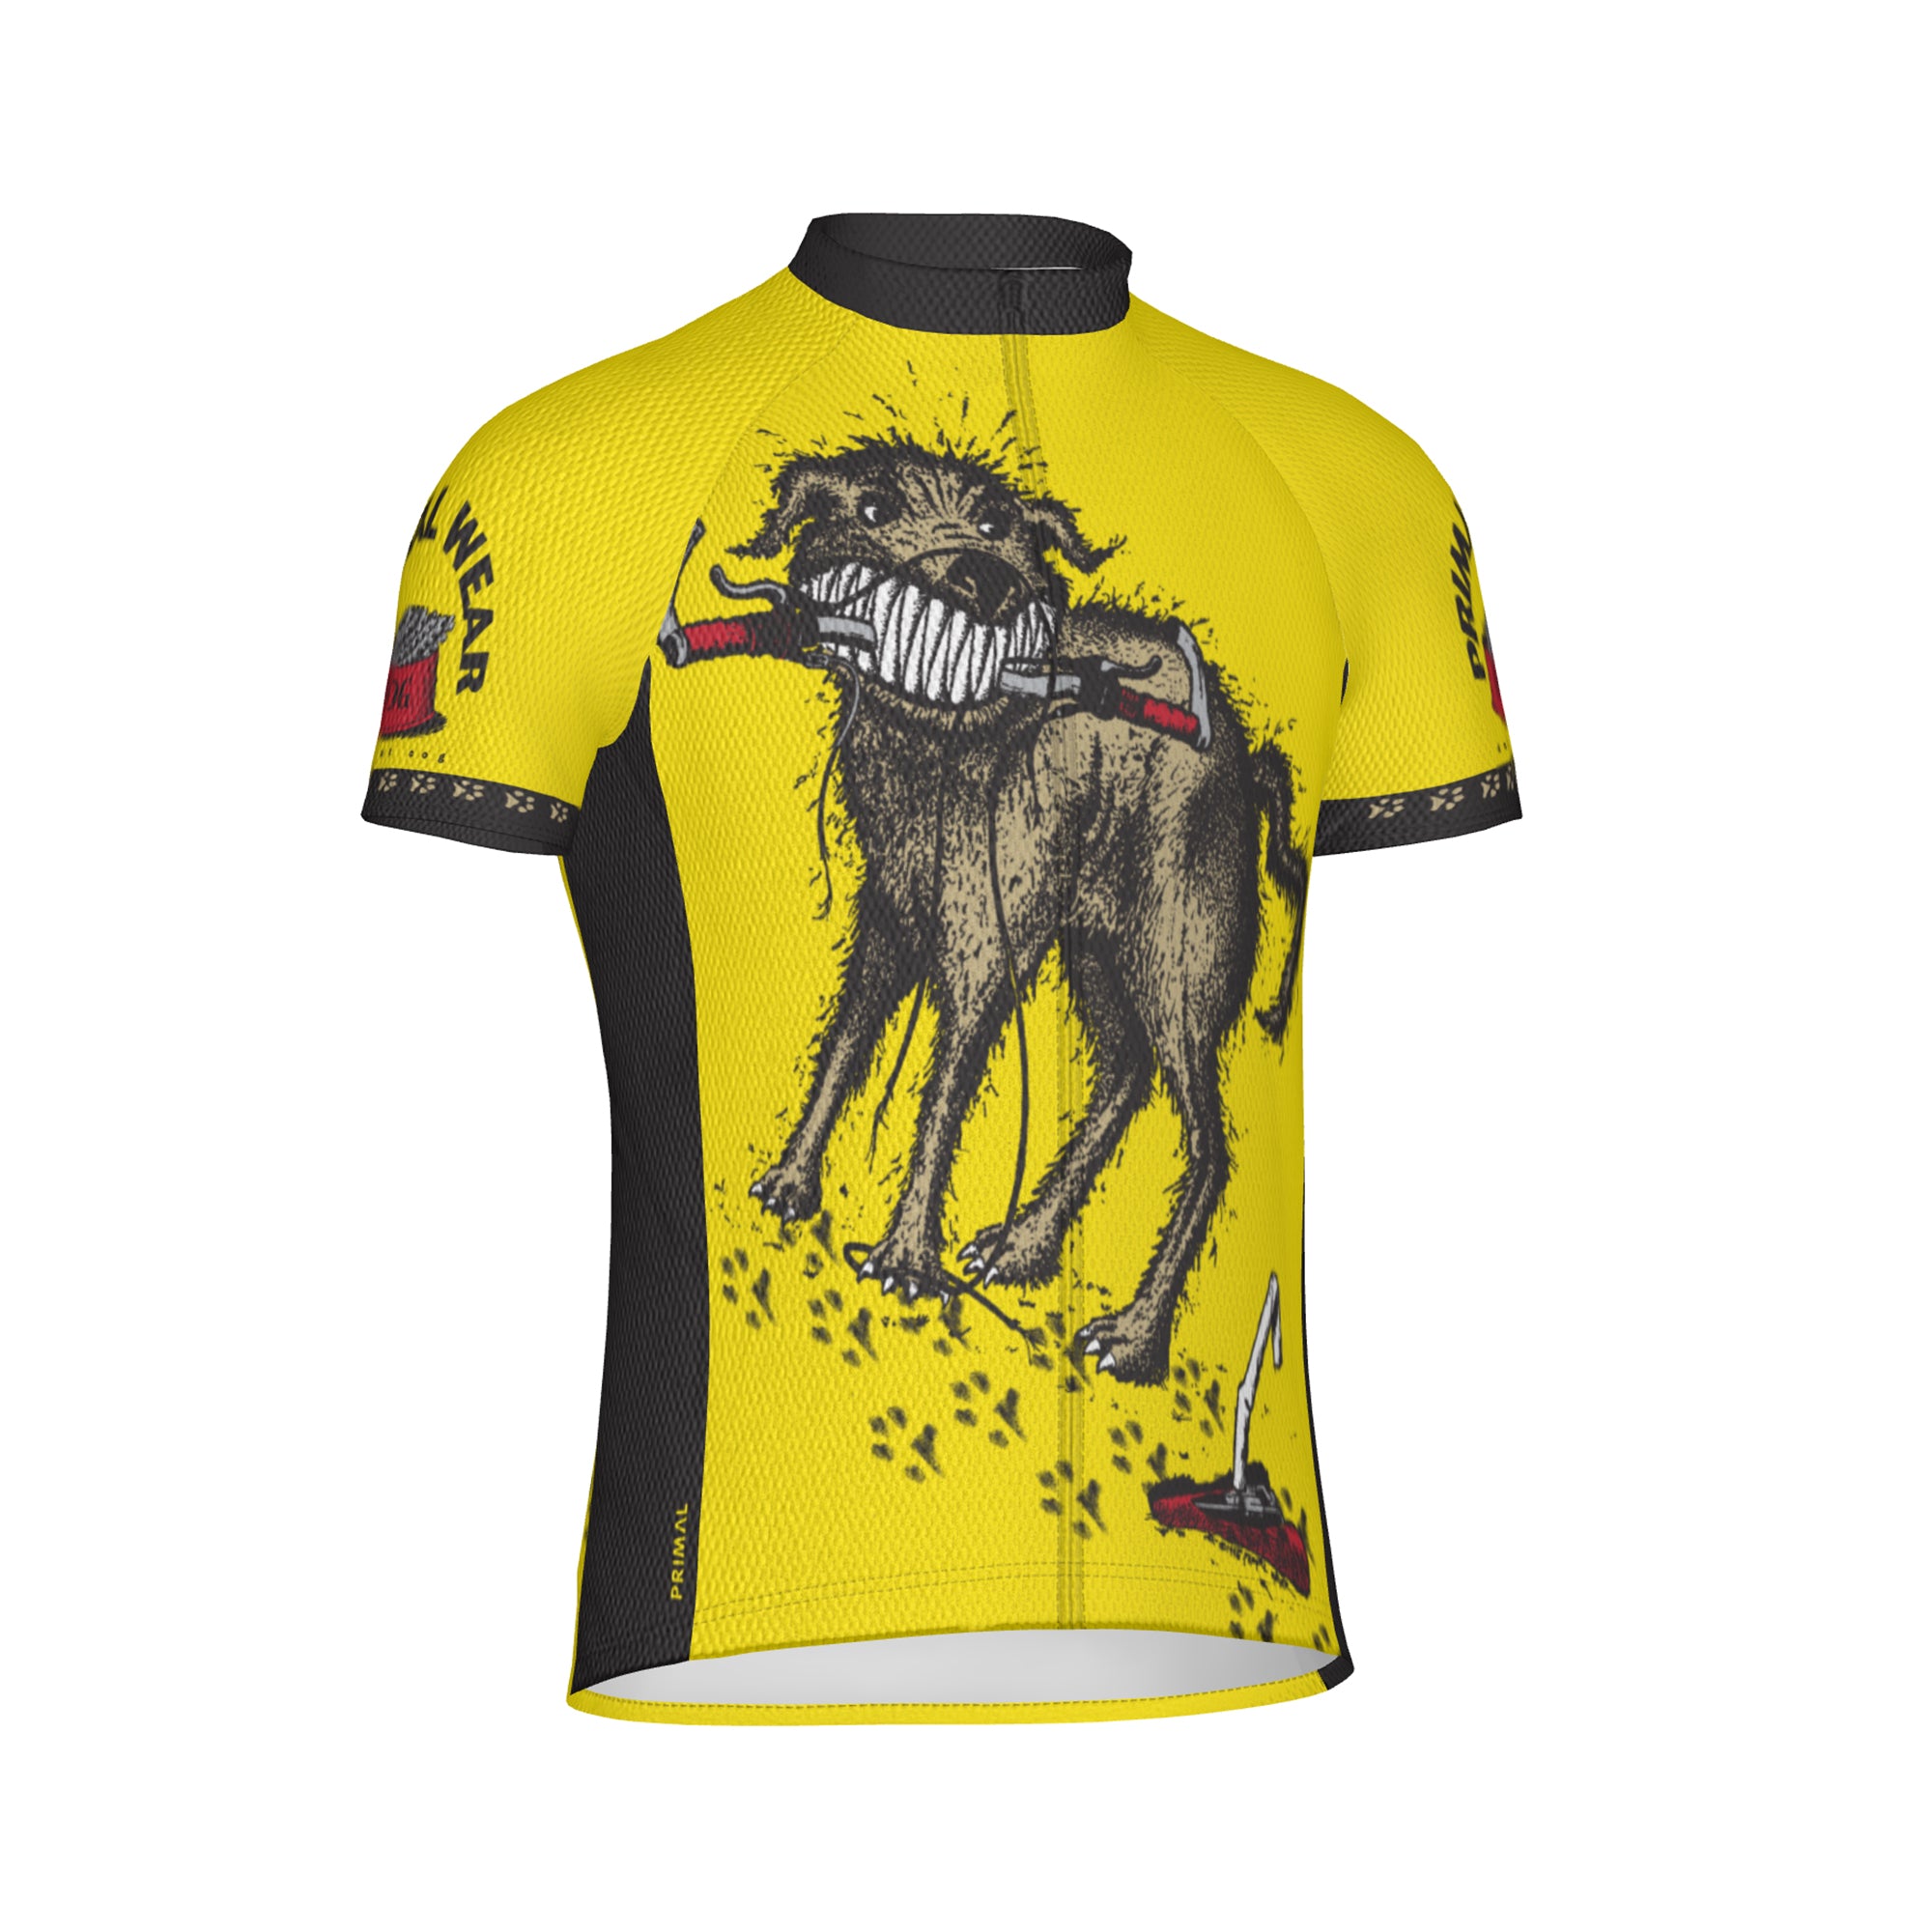 Primal Jerseys - How I Learned to Love These Loud Jerseys